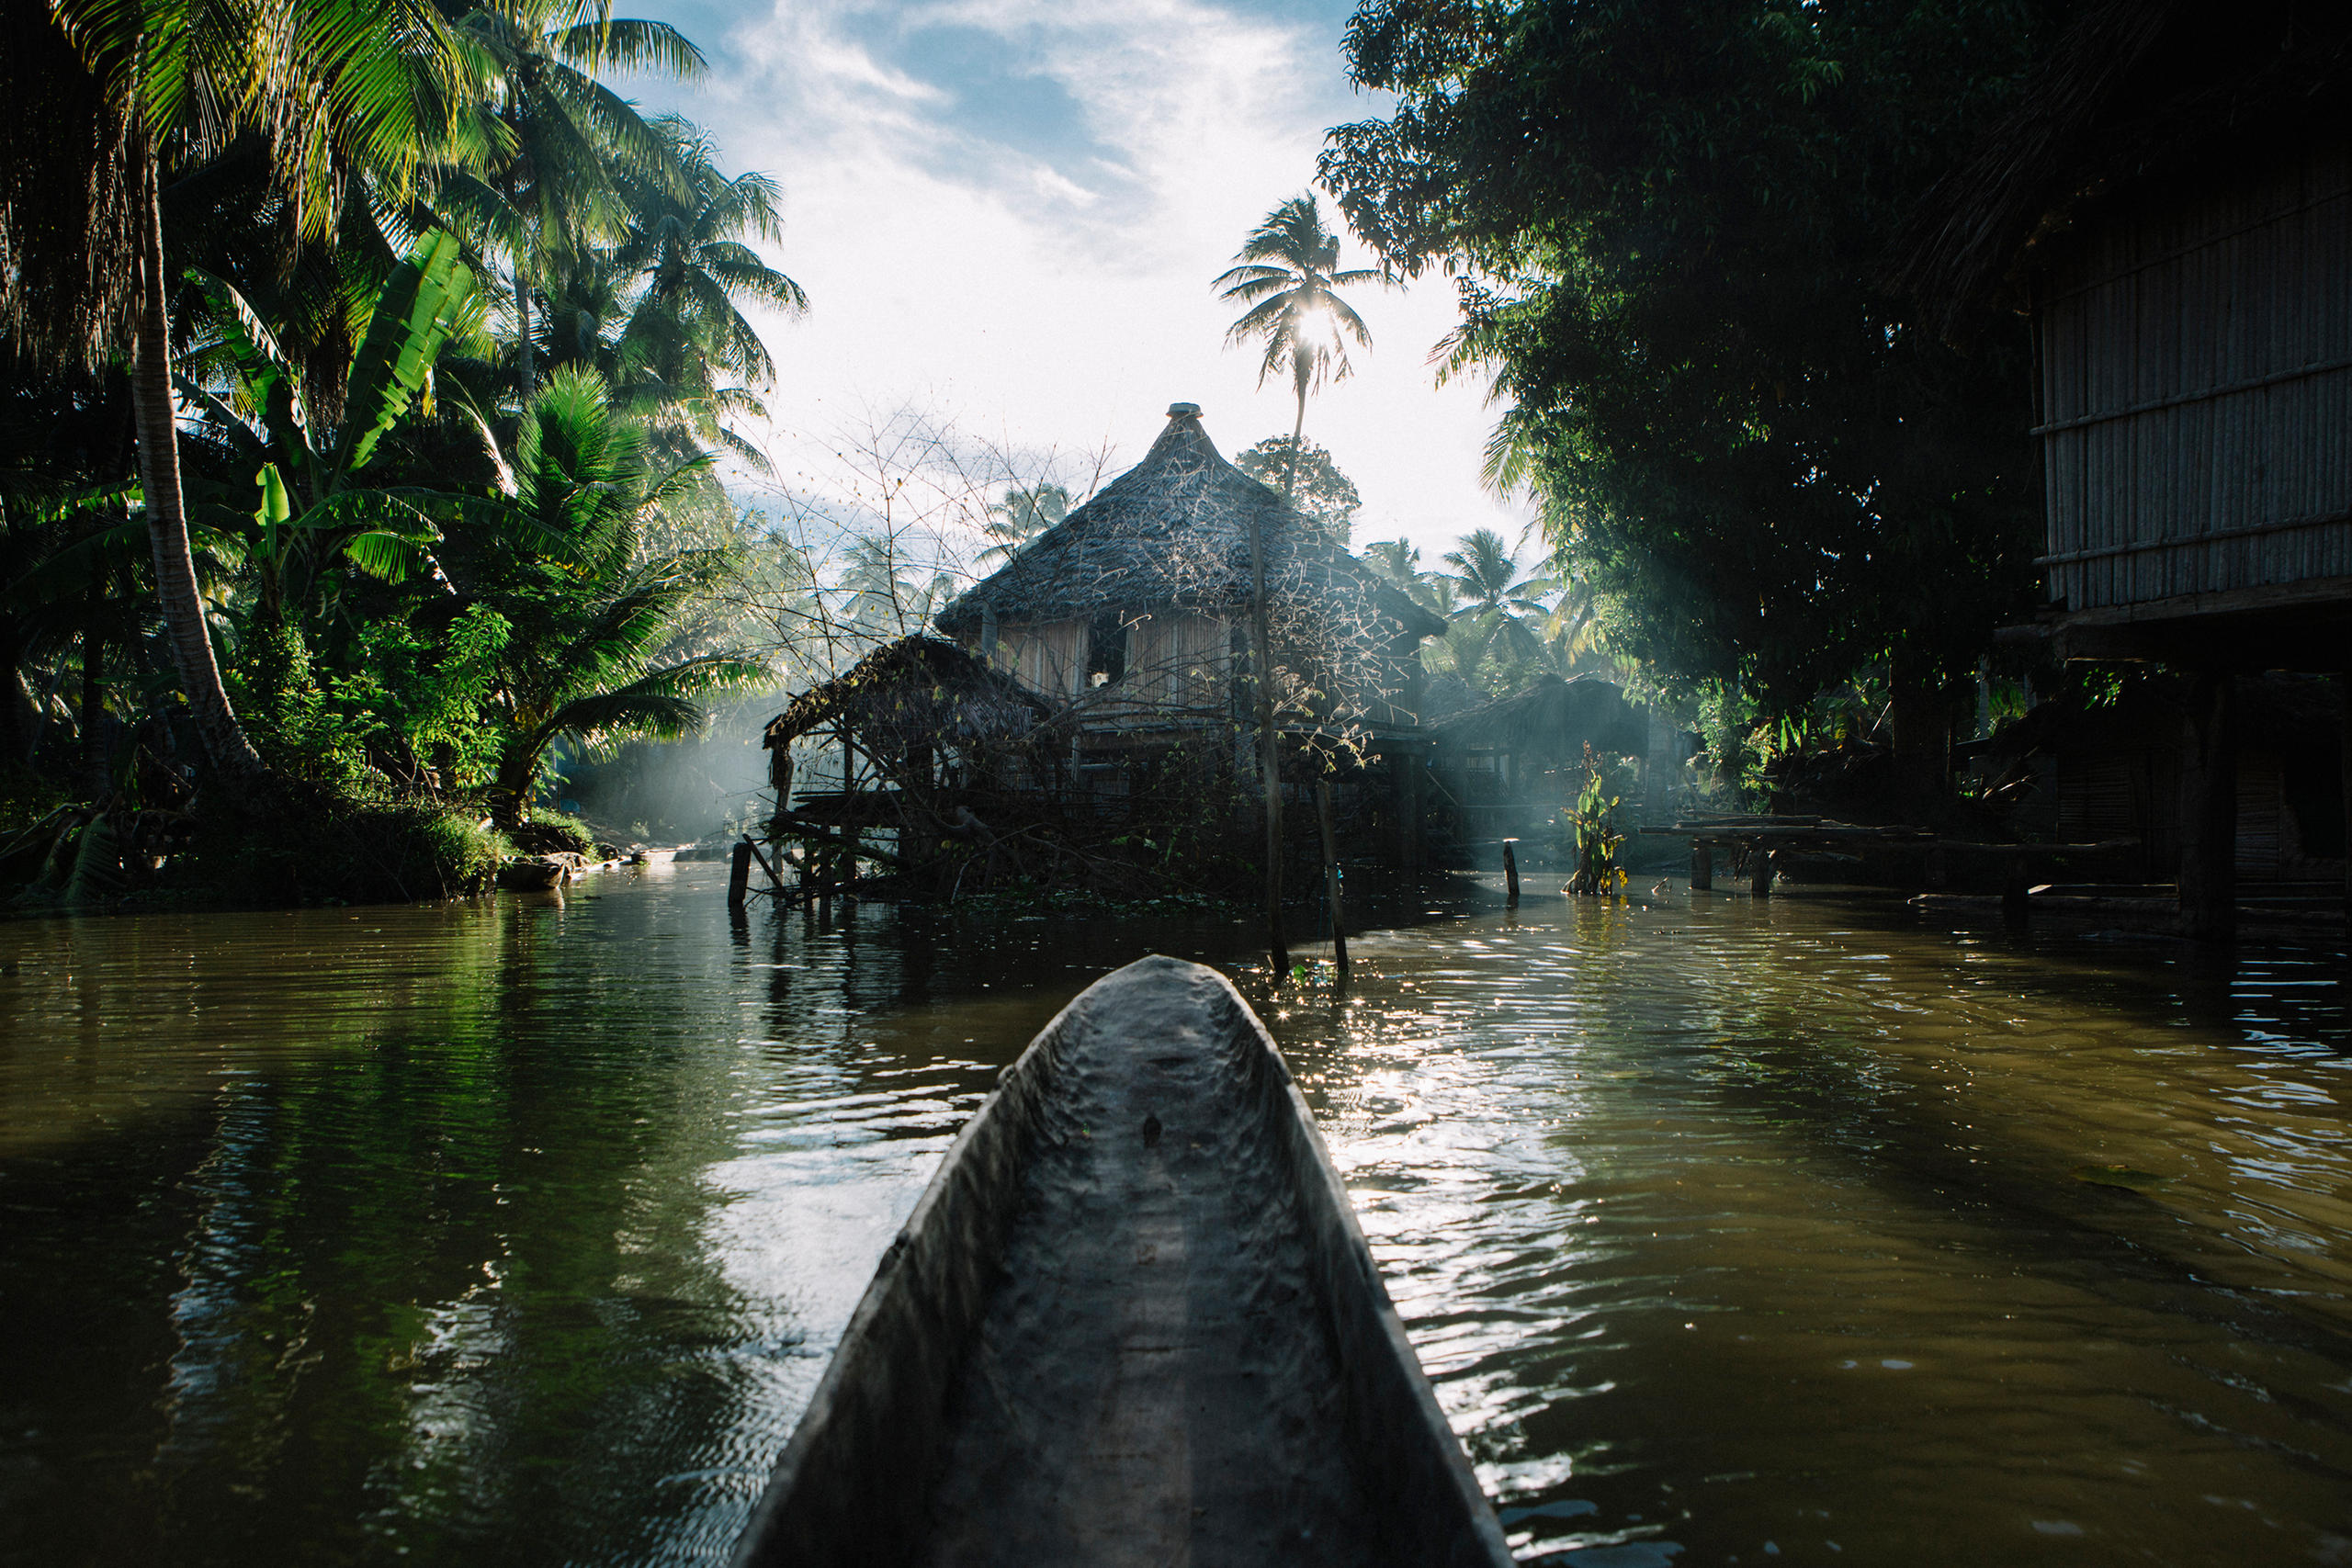 A canoe and a house on poles in Papua New Guinea